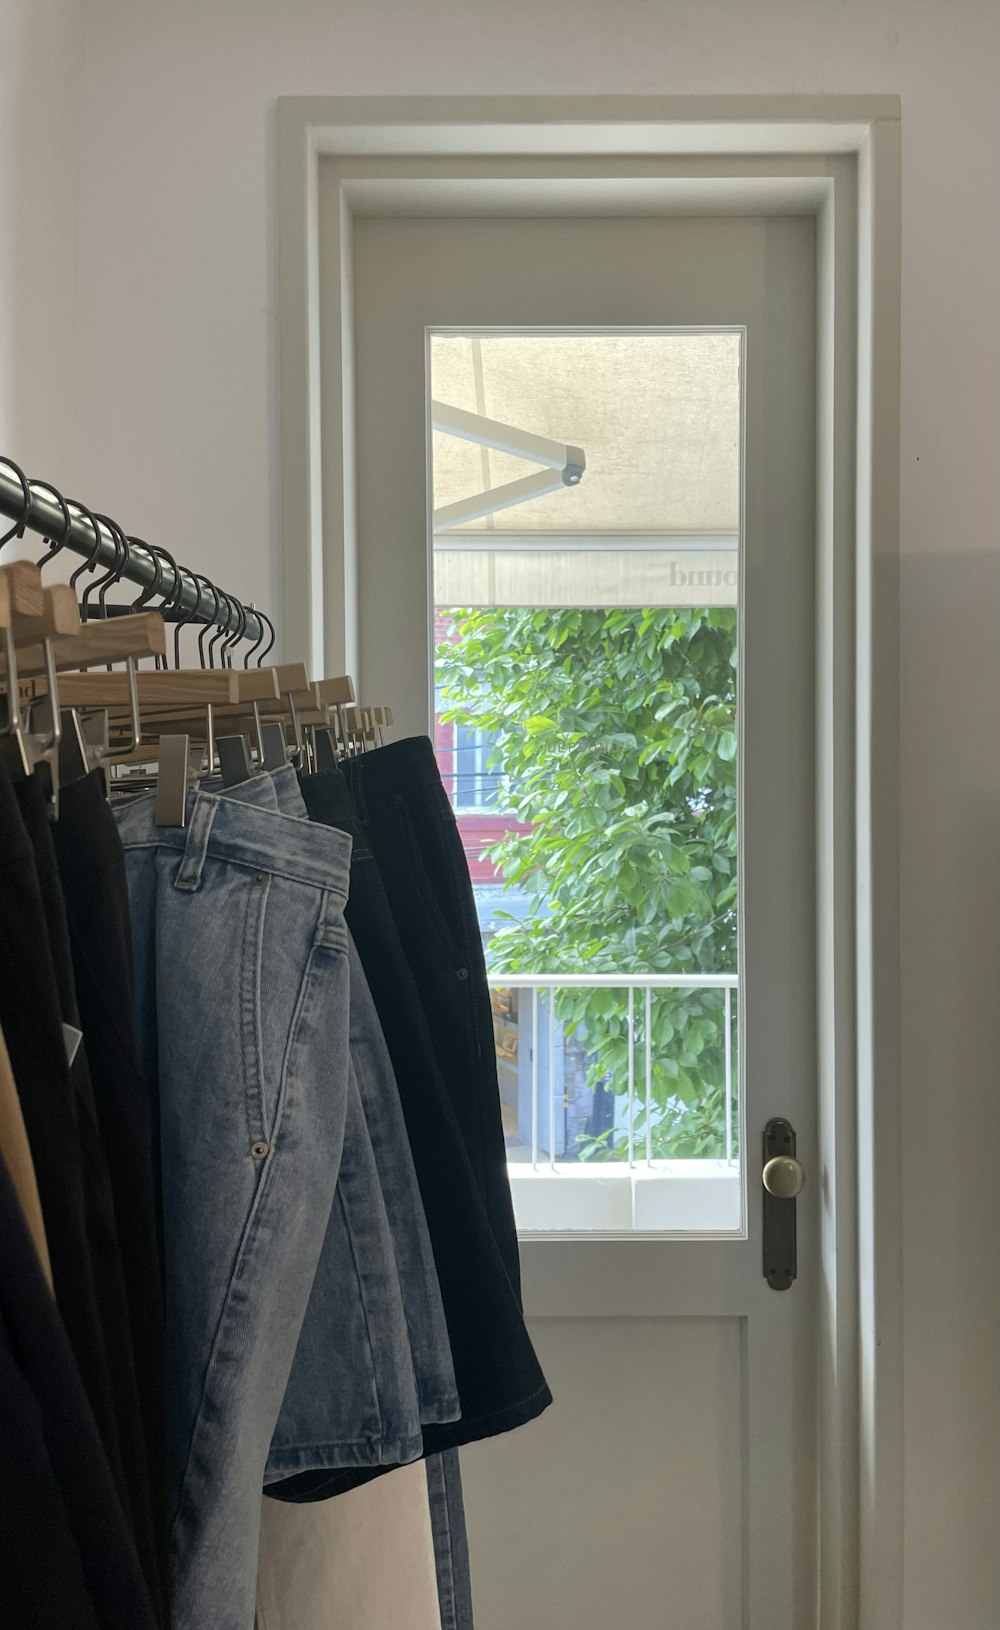 clothes hanging on a rail in front of a window